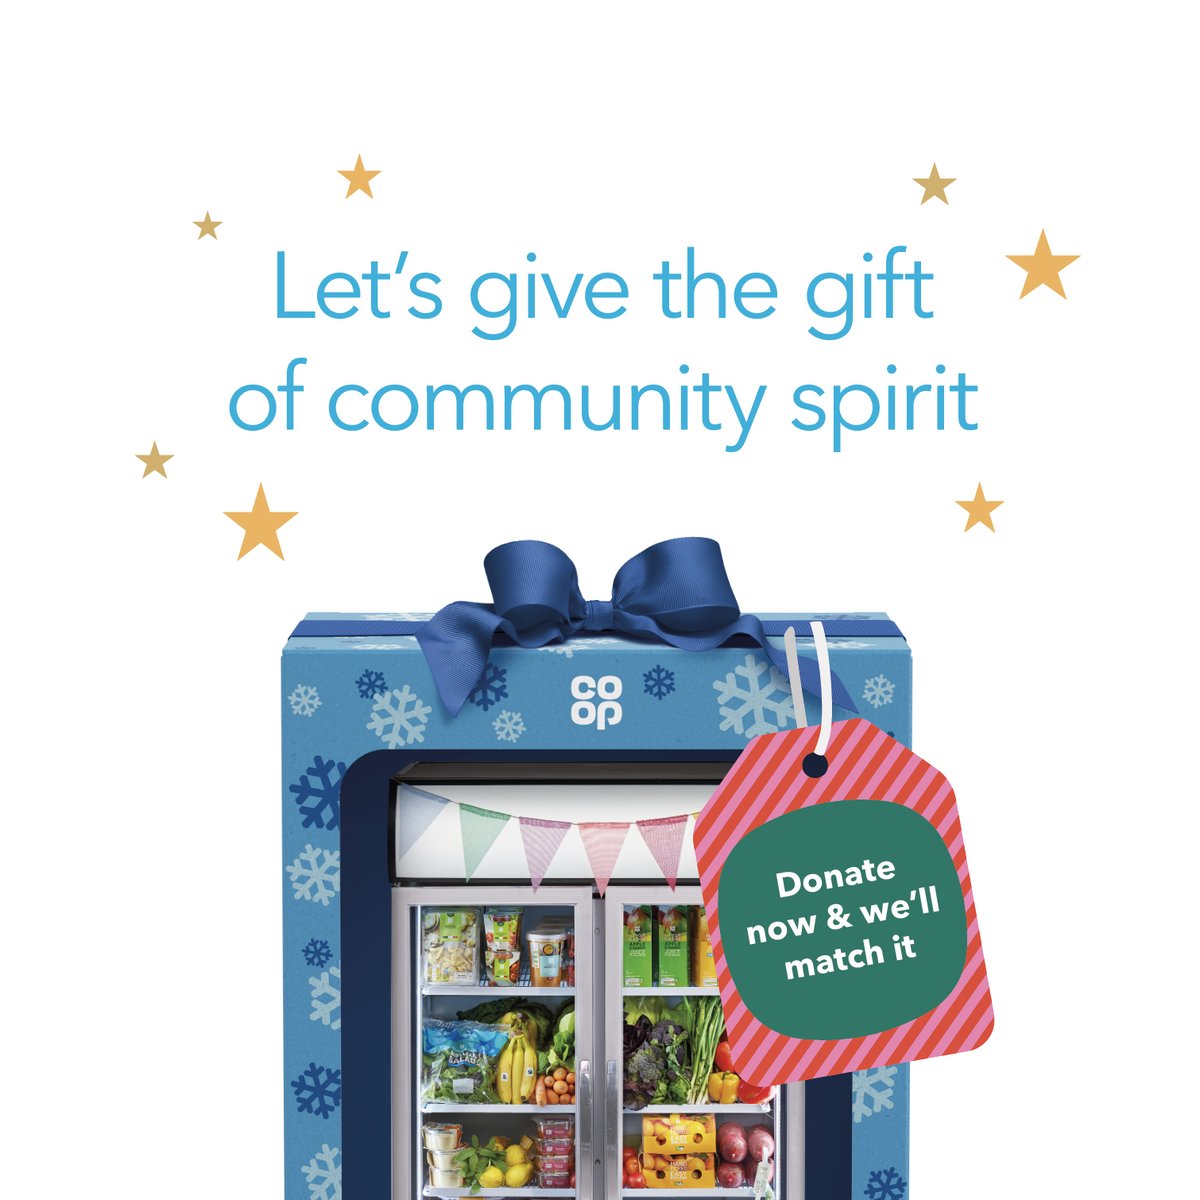 This Christmas, @coopuk are doing things a little differently 🎁🎄 Donate to the Co-op Local Community Fund and they will match your donation, to help support causes across the UK to get the things they really need. Find out more at coop.co.uk/givethegift